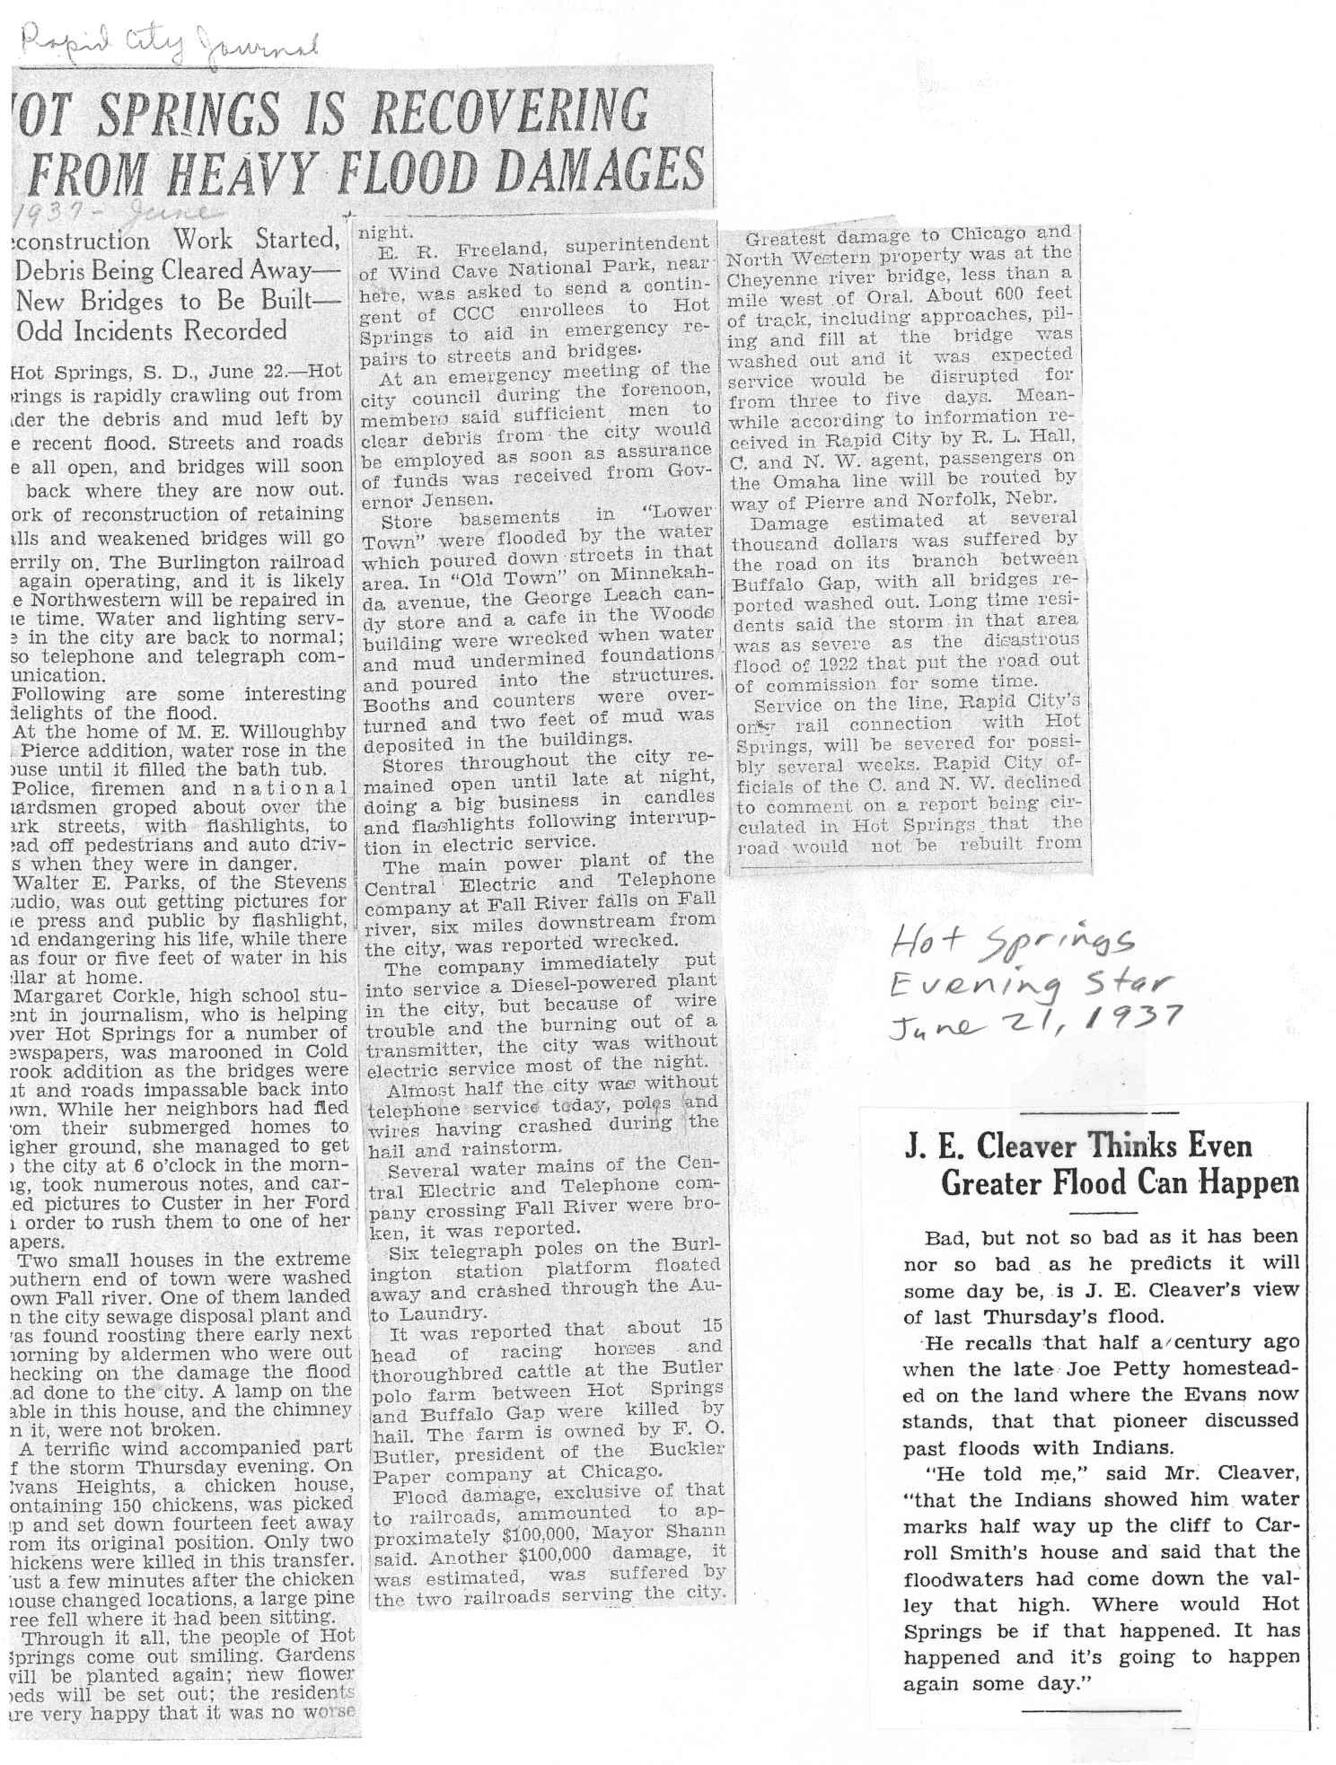 Rapid City Journal and Hot Springs Evening Star (June 21, 1937)